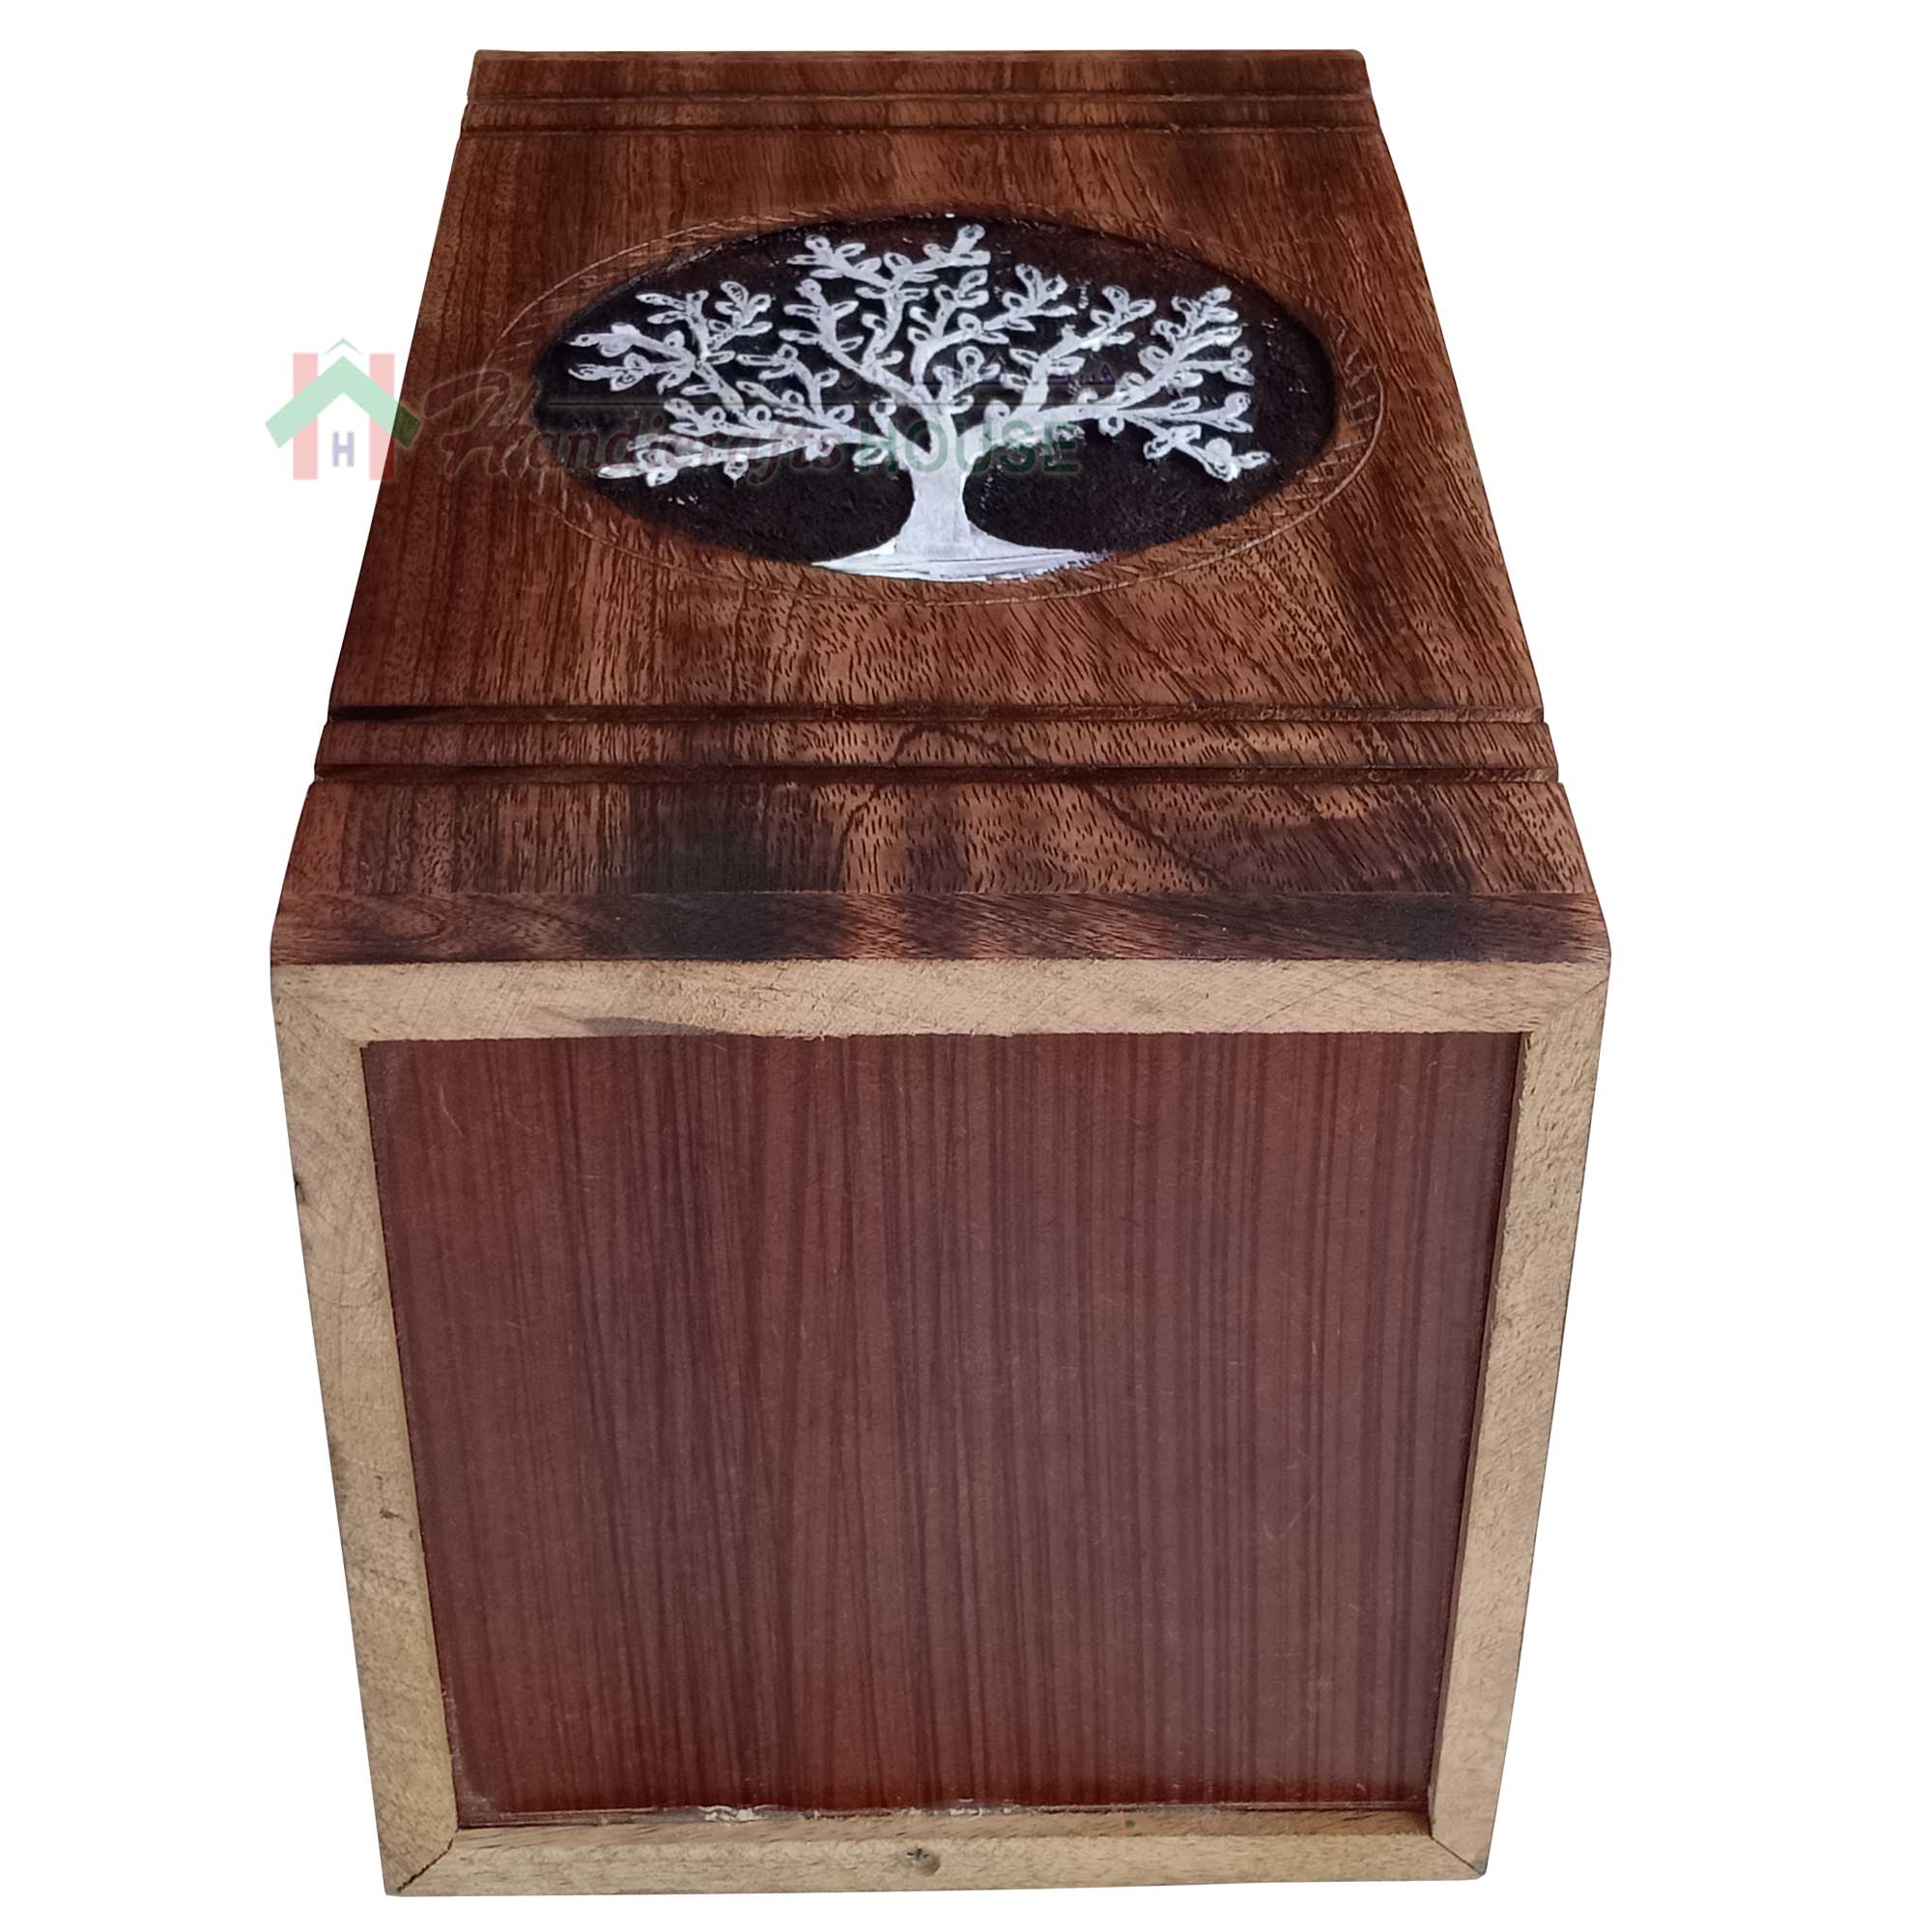 Tree of Life Wooden Cremation Urn for Human and Pet Ashes, Memorials Urns for Adult